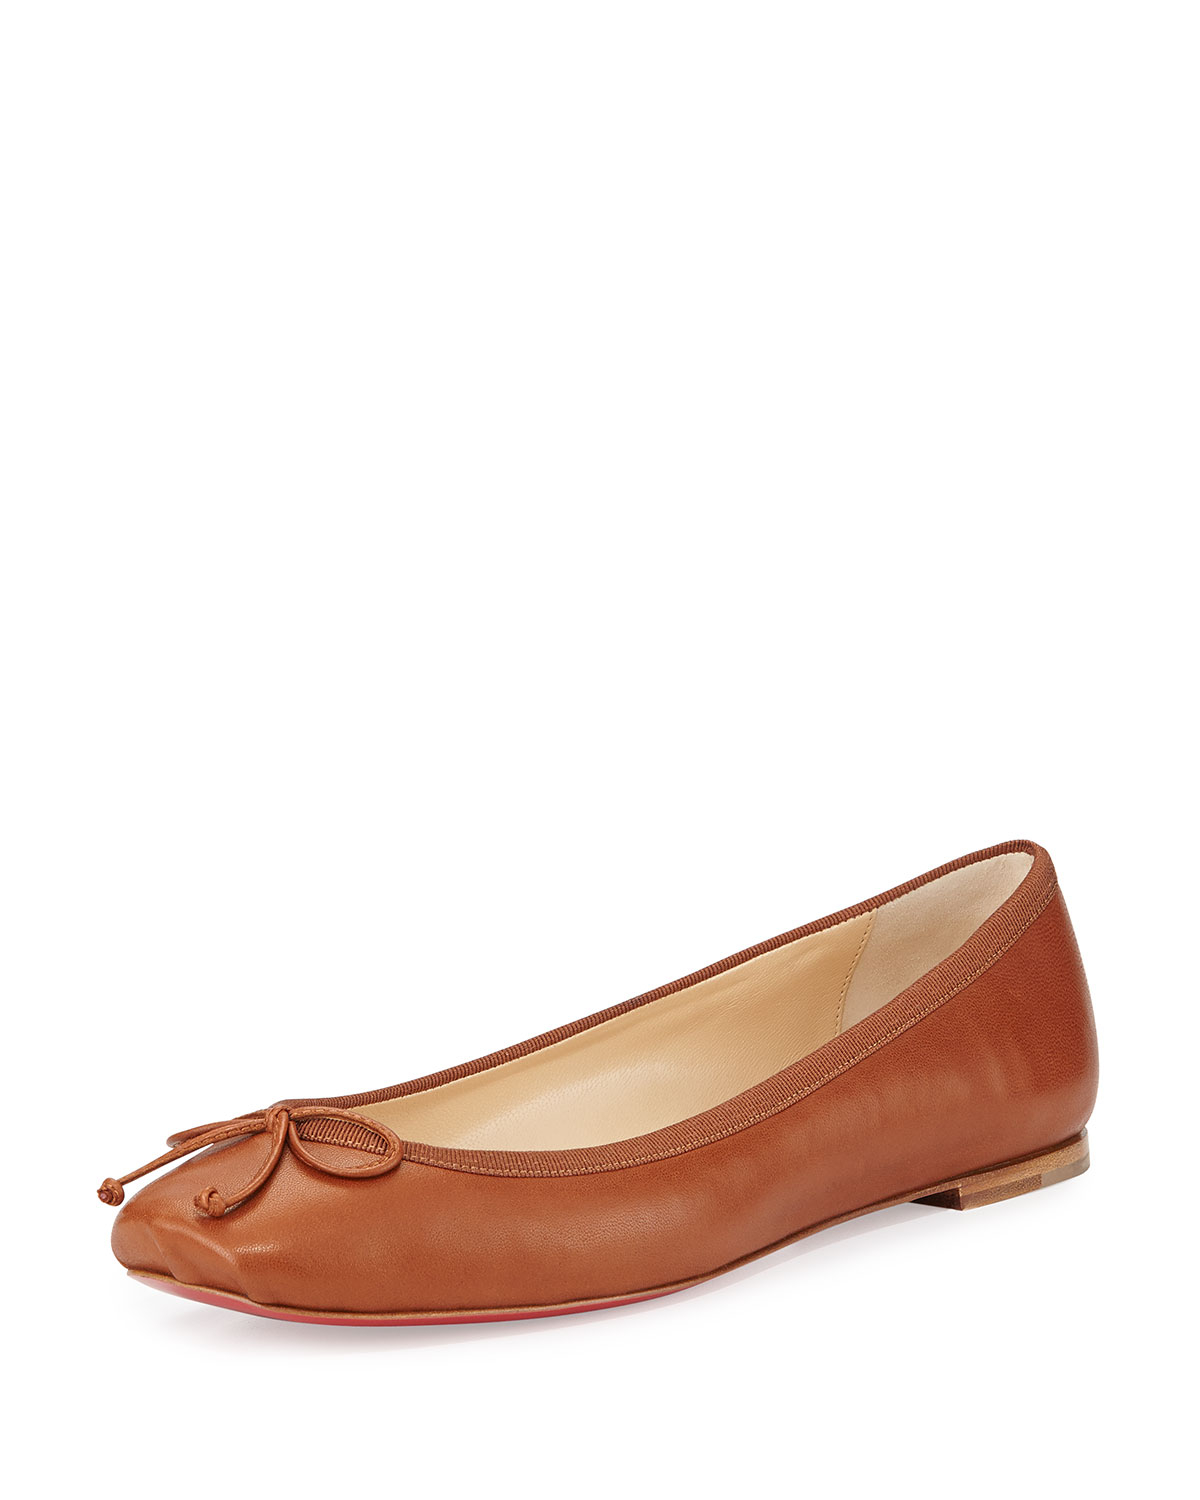 louboutin replica boots - Christian louboutin Rosella Napa Leather Ballet Flat in Brown | Lyst